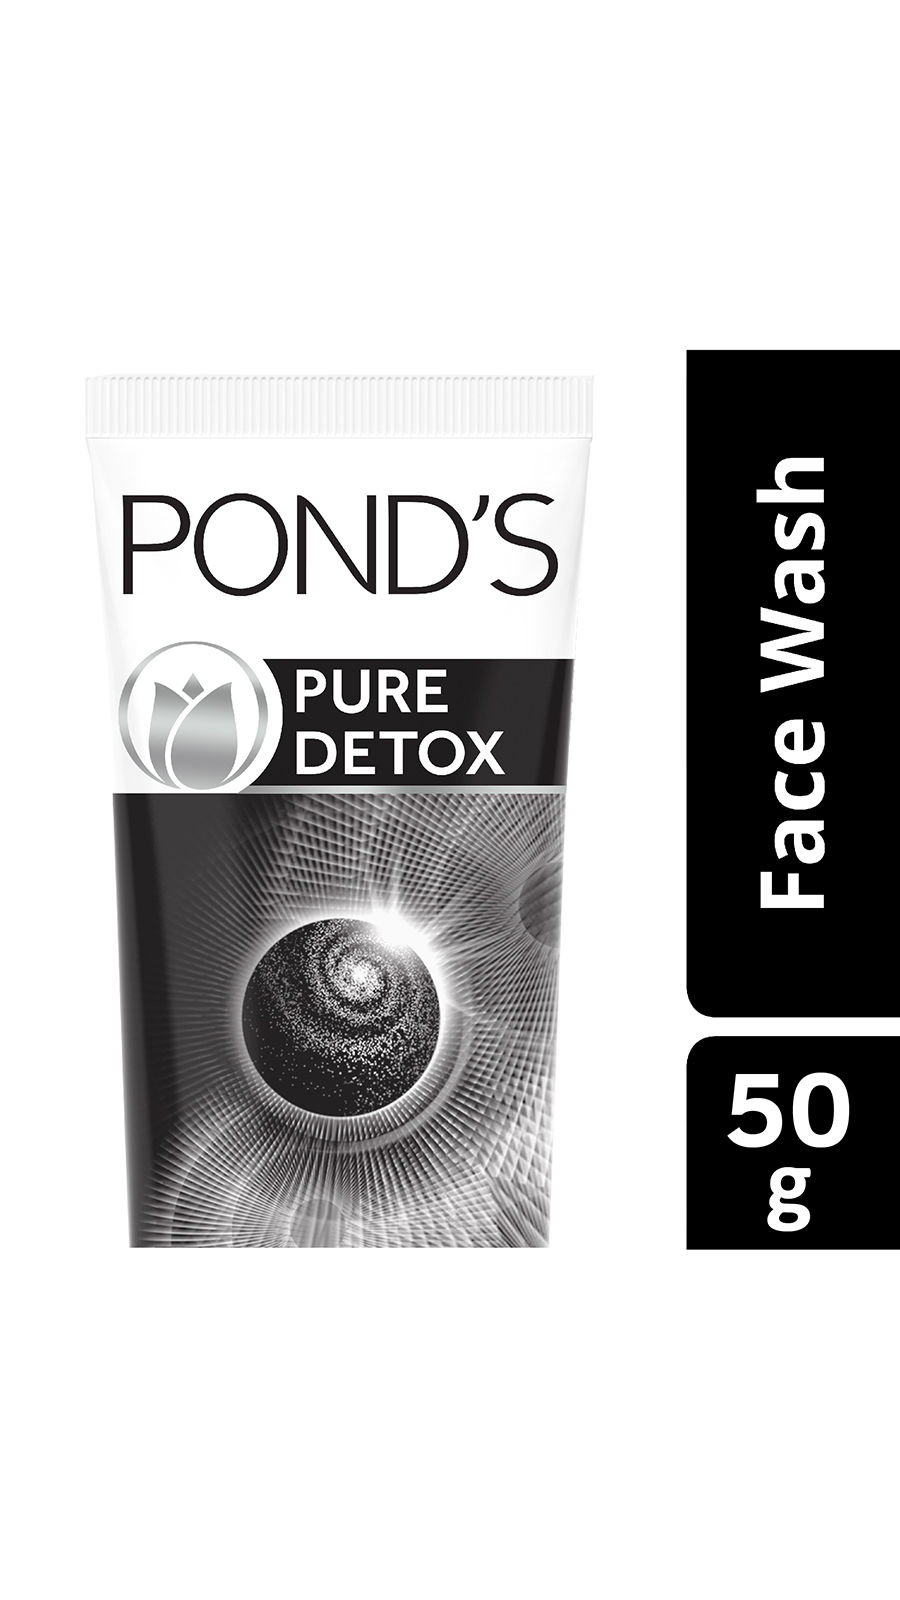 Ponds Pure Detox Face Wash, 50 gm, Pack of 1 